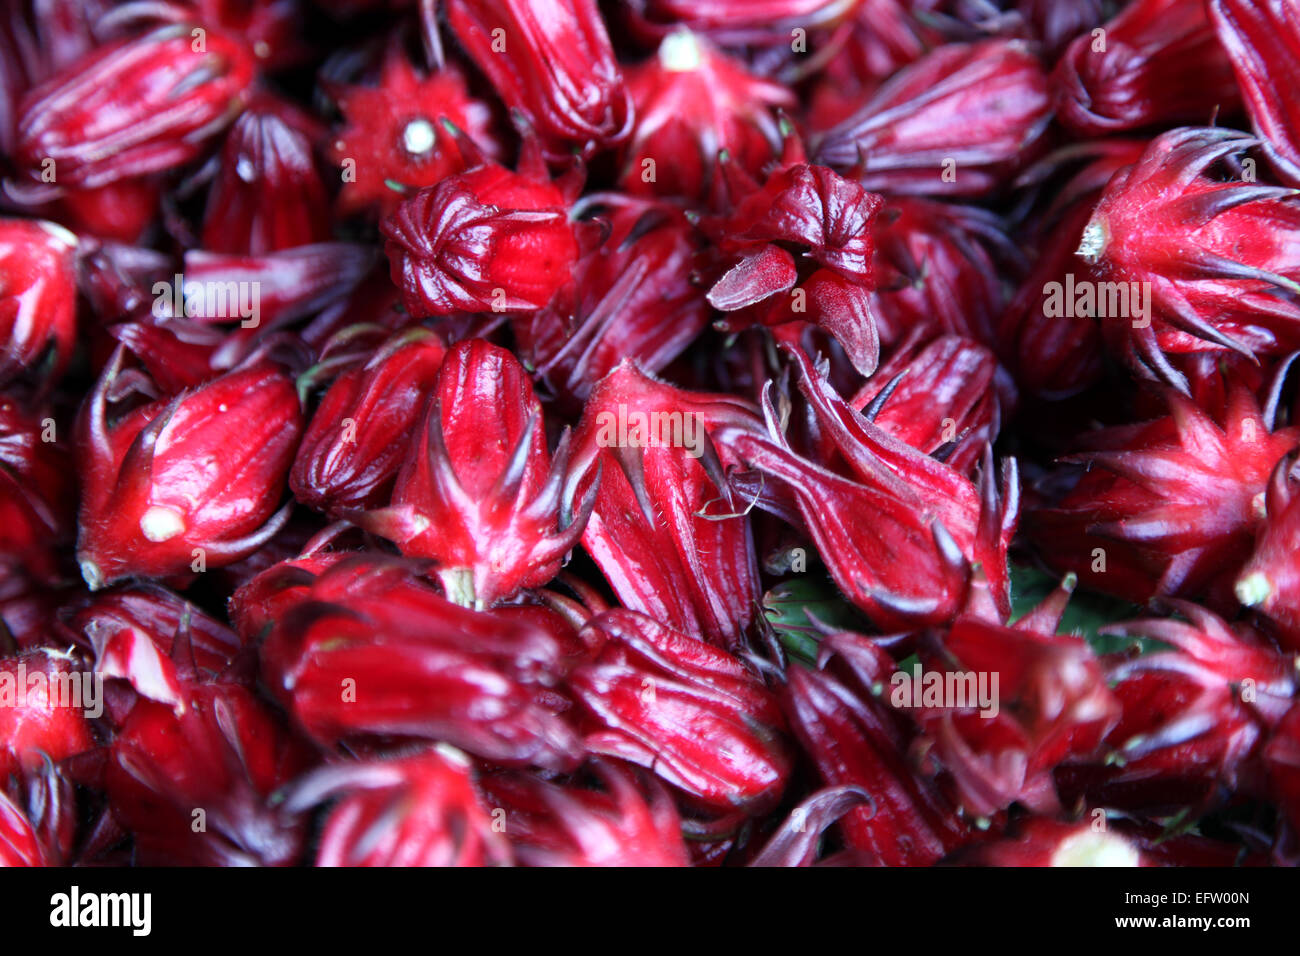 A close view of Sorrel or Rosella fruits on a market stall. It is used in the Caribbean to make a beverage. Stock Photo